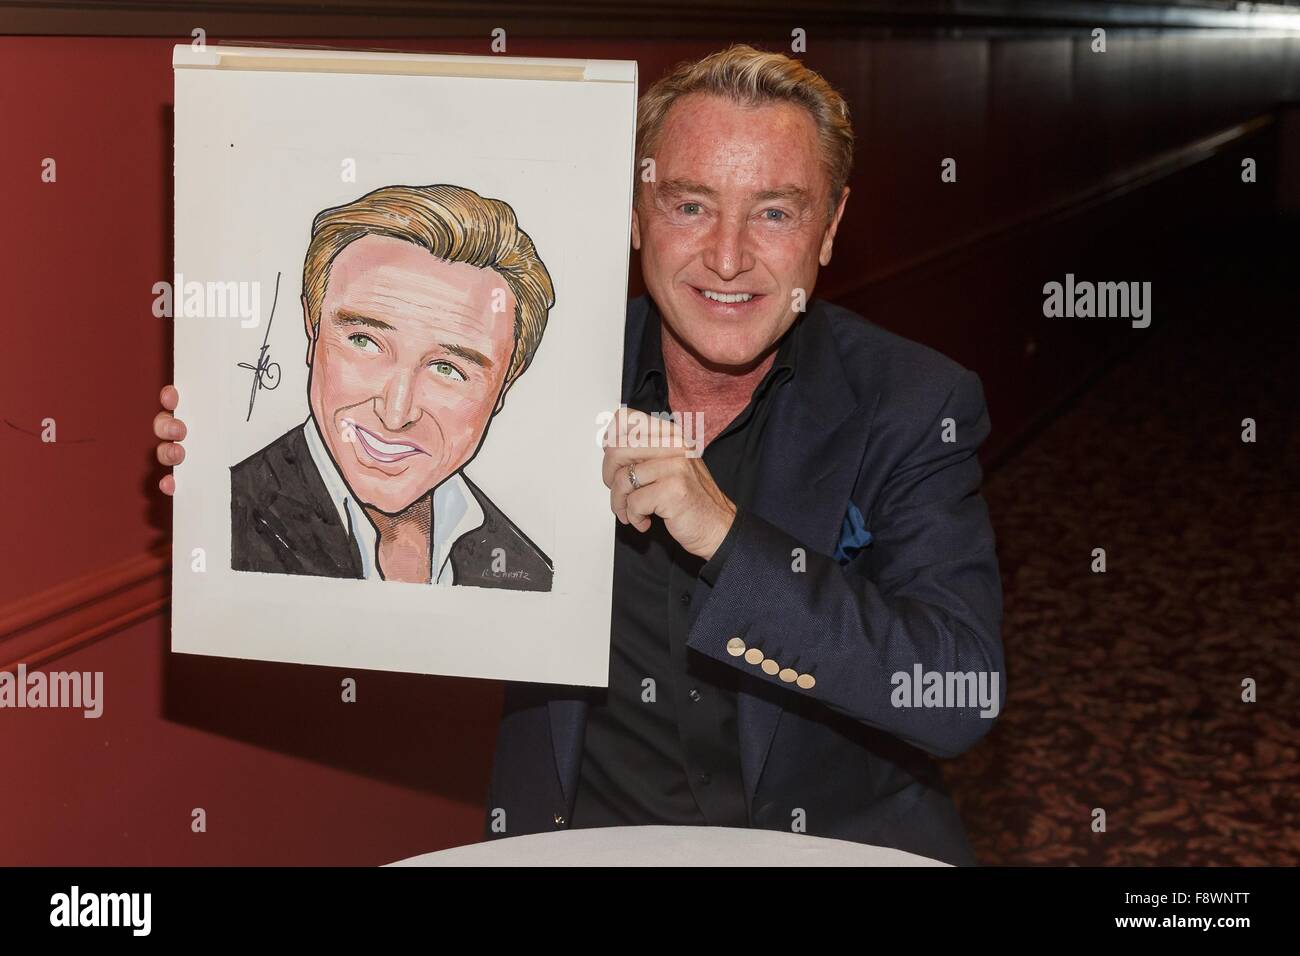 New York, NY, USA. 11th Dec, 2015. Michael Flatley at a public appearance for Lord of the Dance Michael Flatley Gets Caricature Portrait at Sardi's, Sardi's Restaurant, New York, NY December 11, 2015. Credit:  Jason Smith/Everett Collection/Alamy Live News Stock Photo